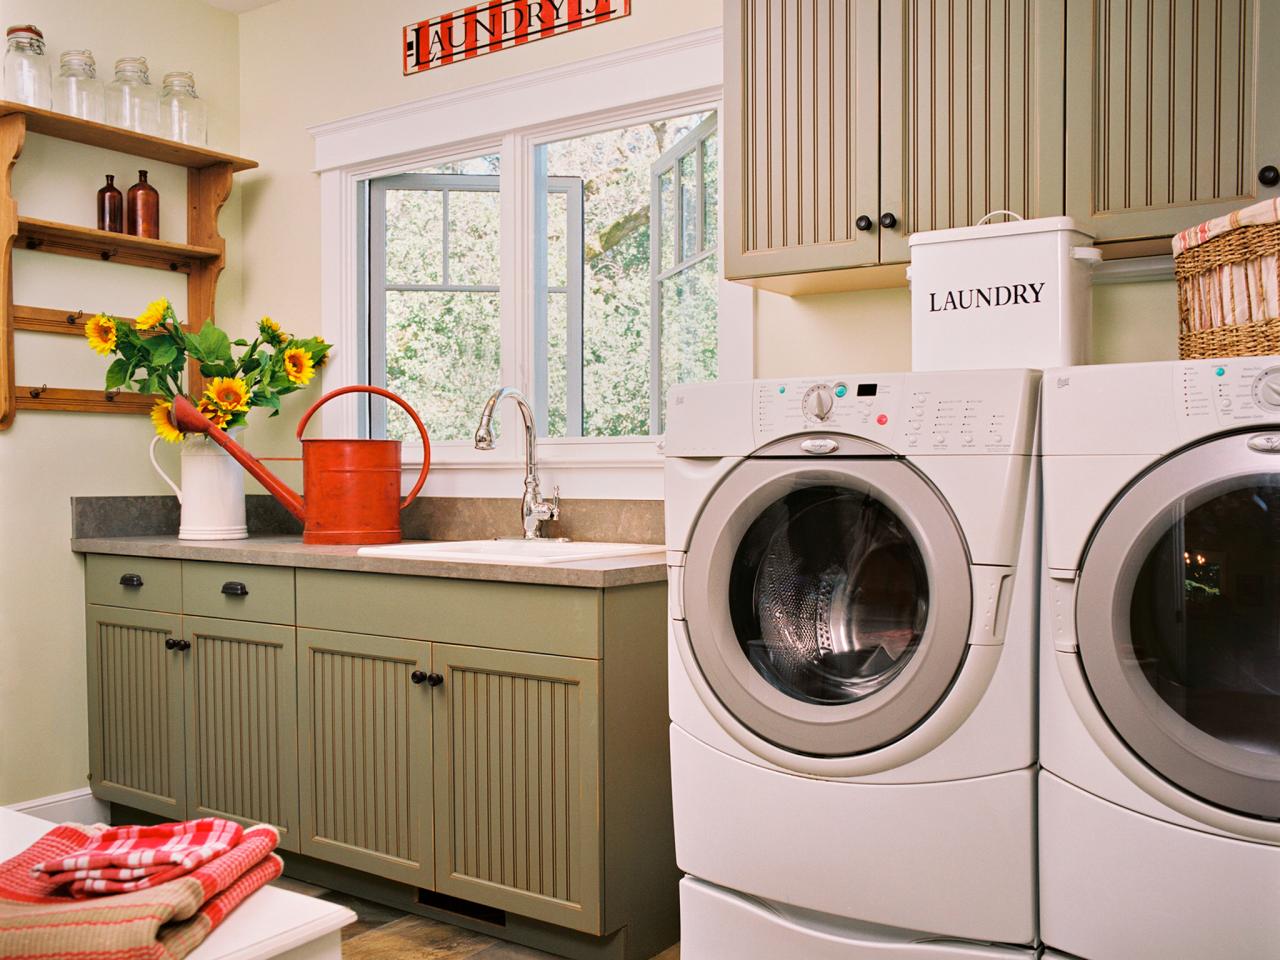 Dp Jane Ellison Country Style Laundry Room - Organize A Laundry Room - HD Wallpaper 